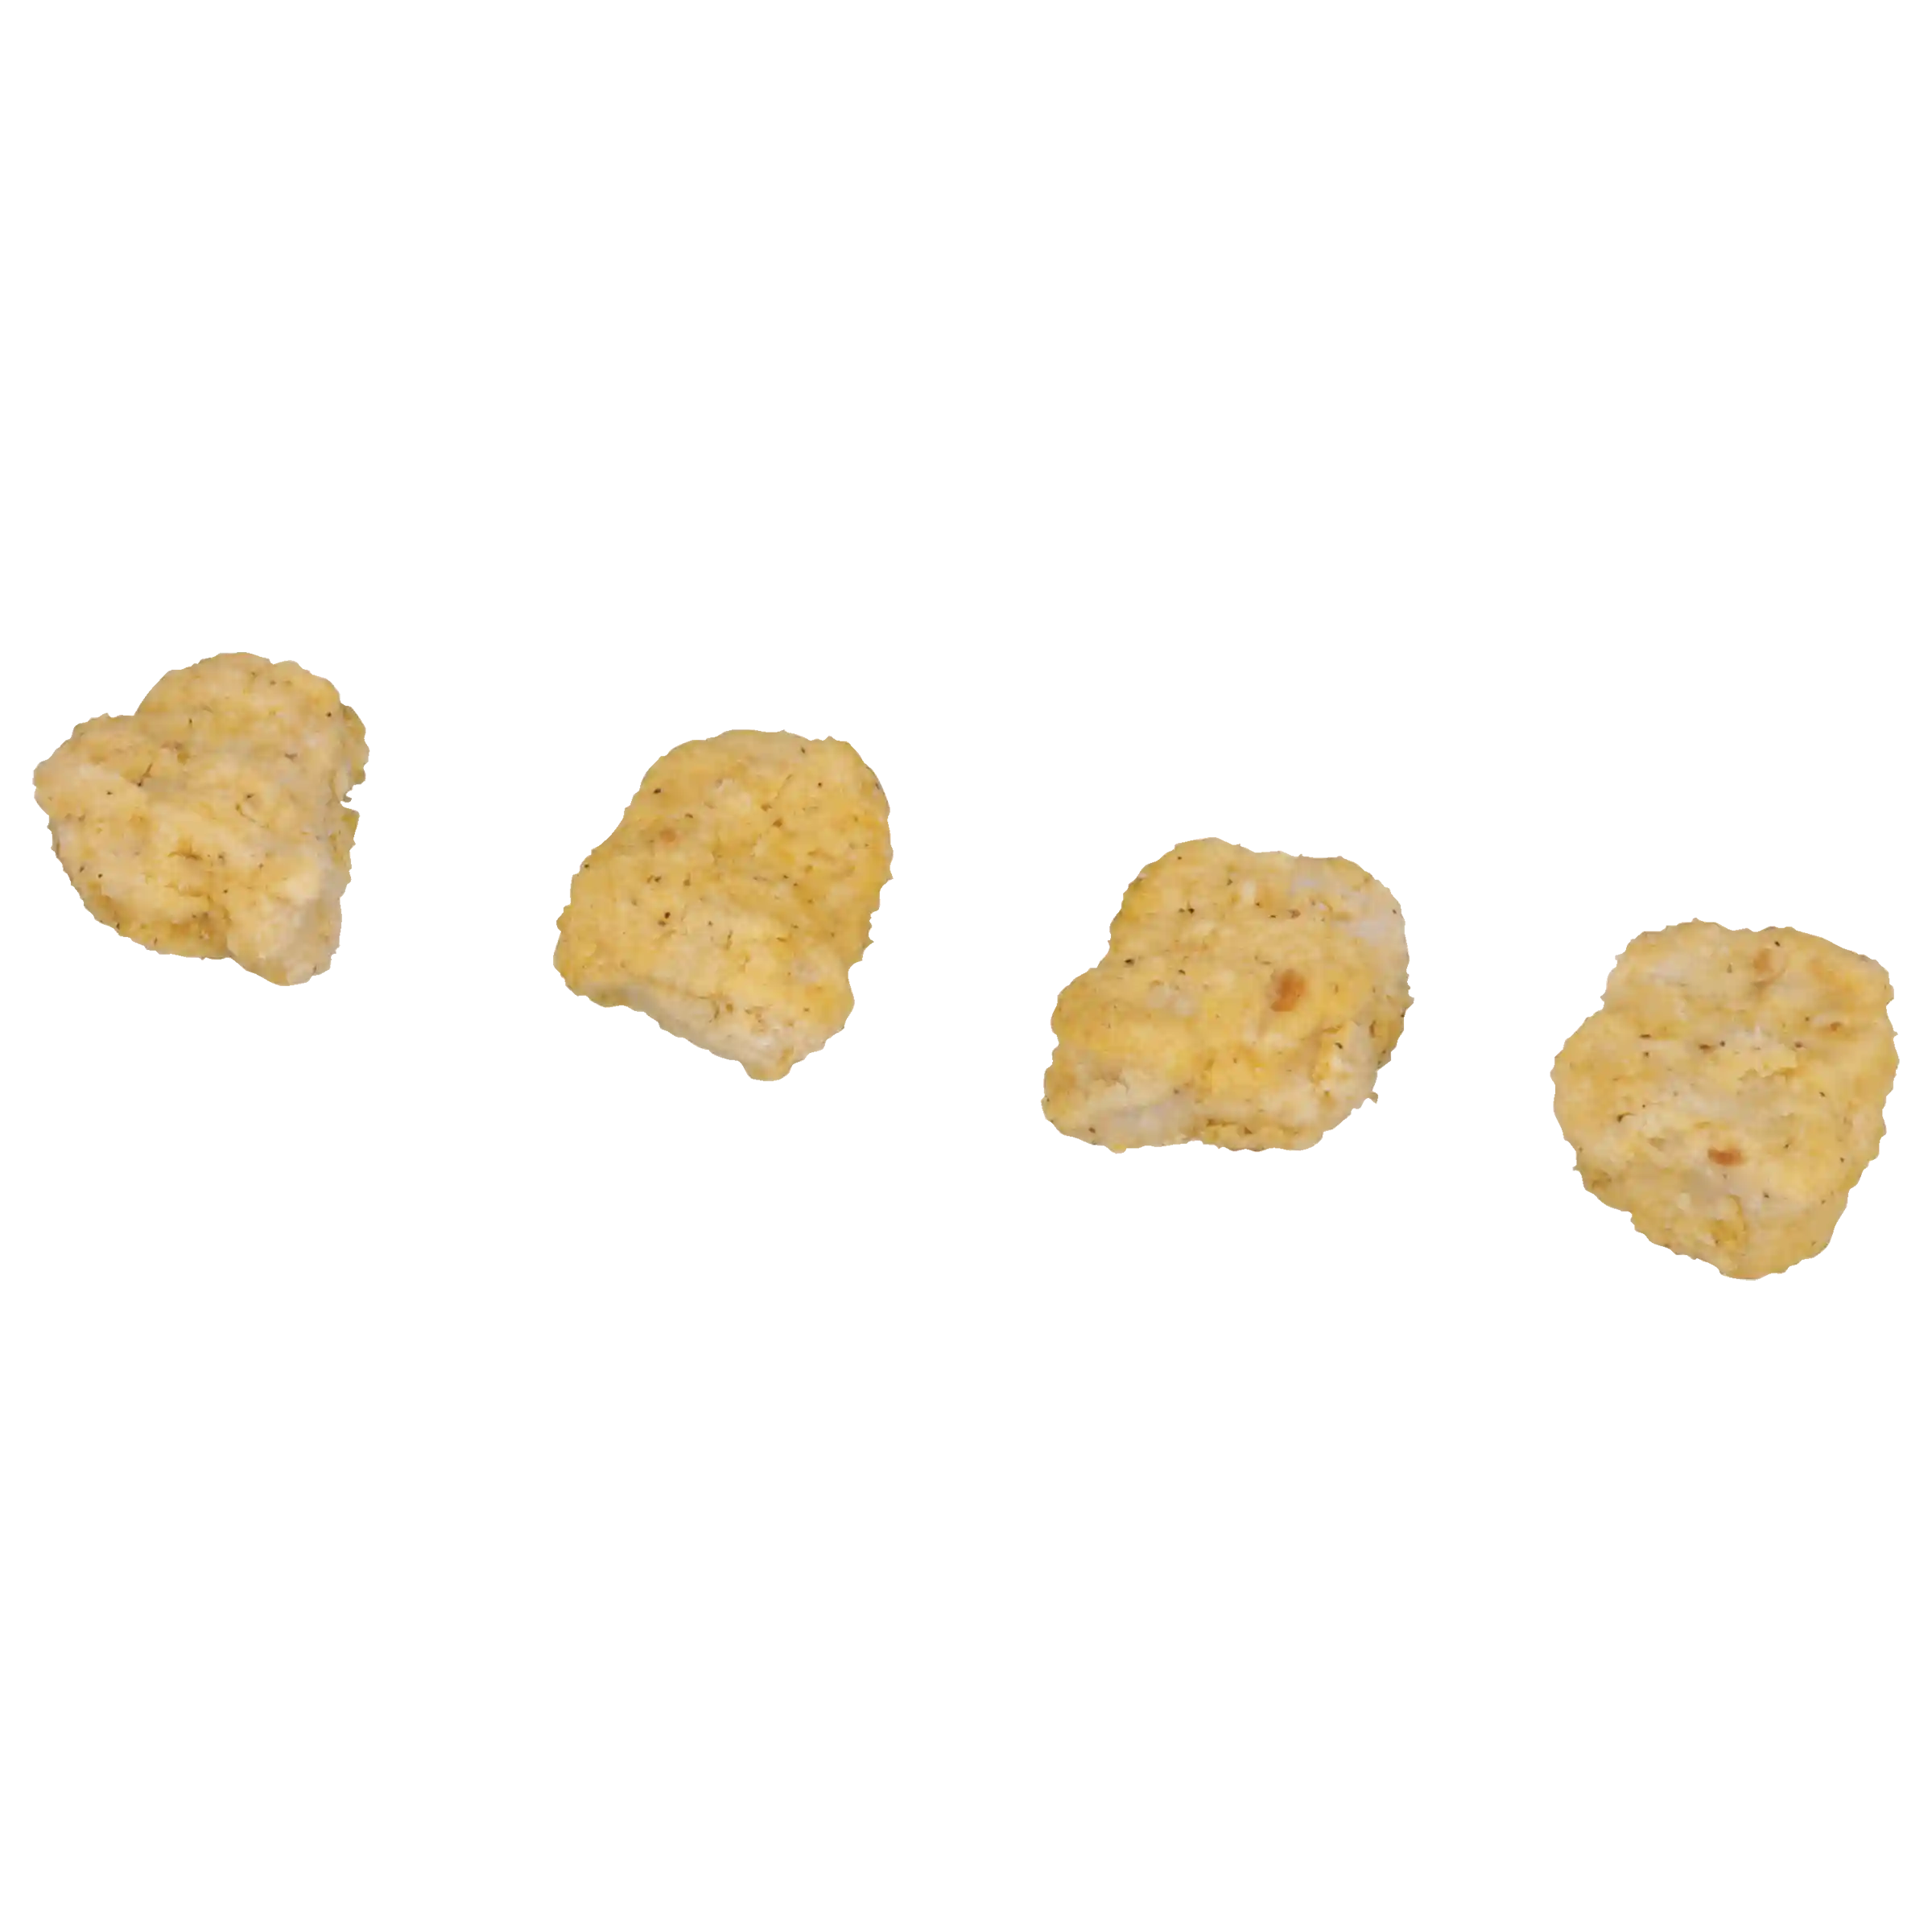 Tyson® Fully Cooked Tempura Whole Grain Battered Chicken Nuggets, CN, 0.75 oz. _image_21